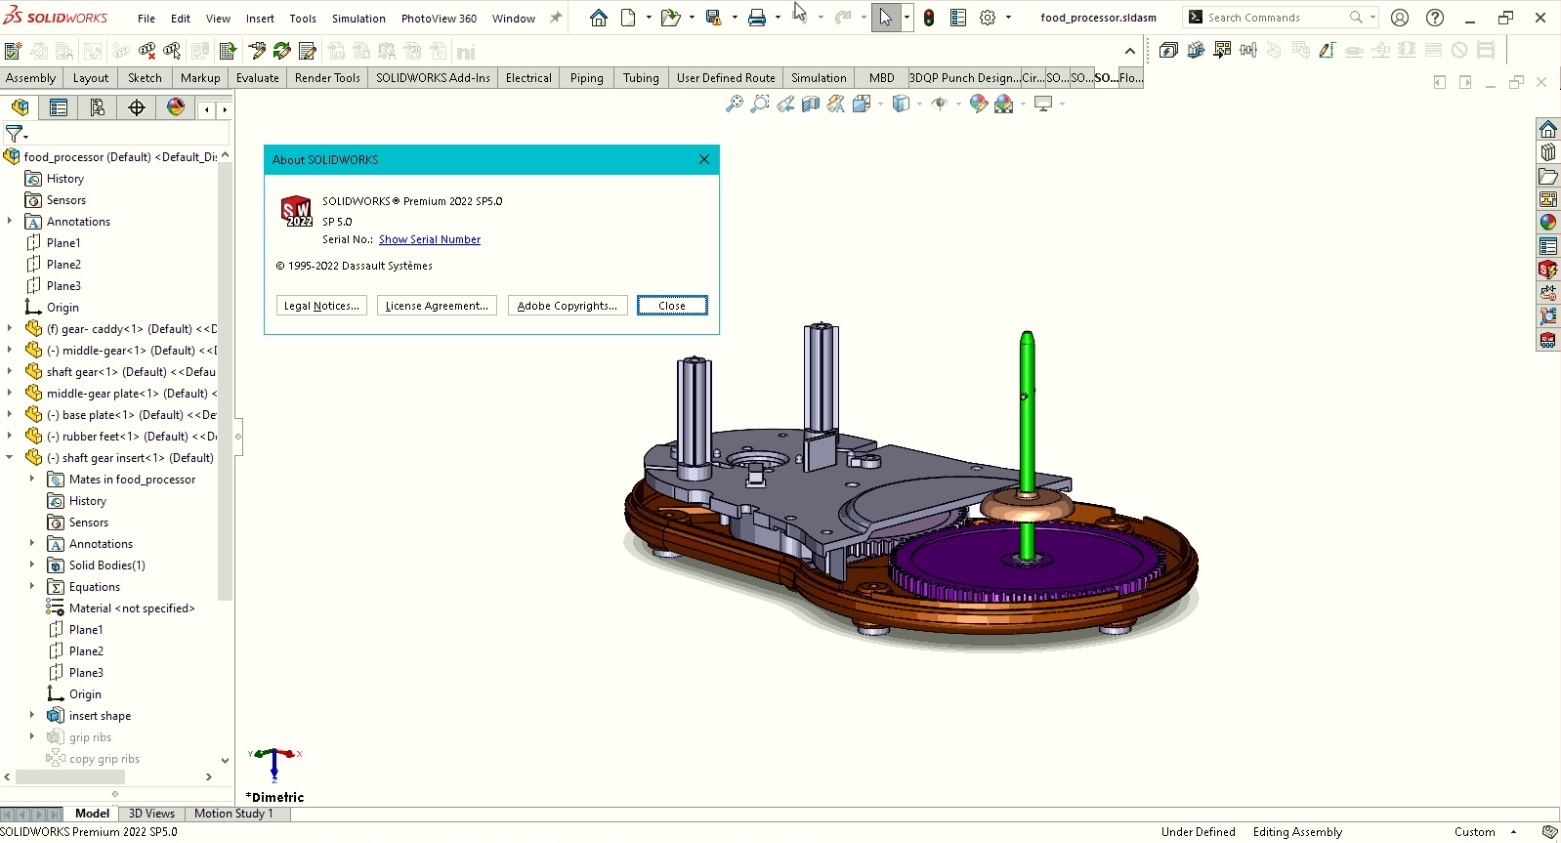 Working with SolidWorks 2022 SP5.0 full license